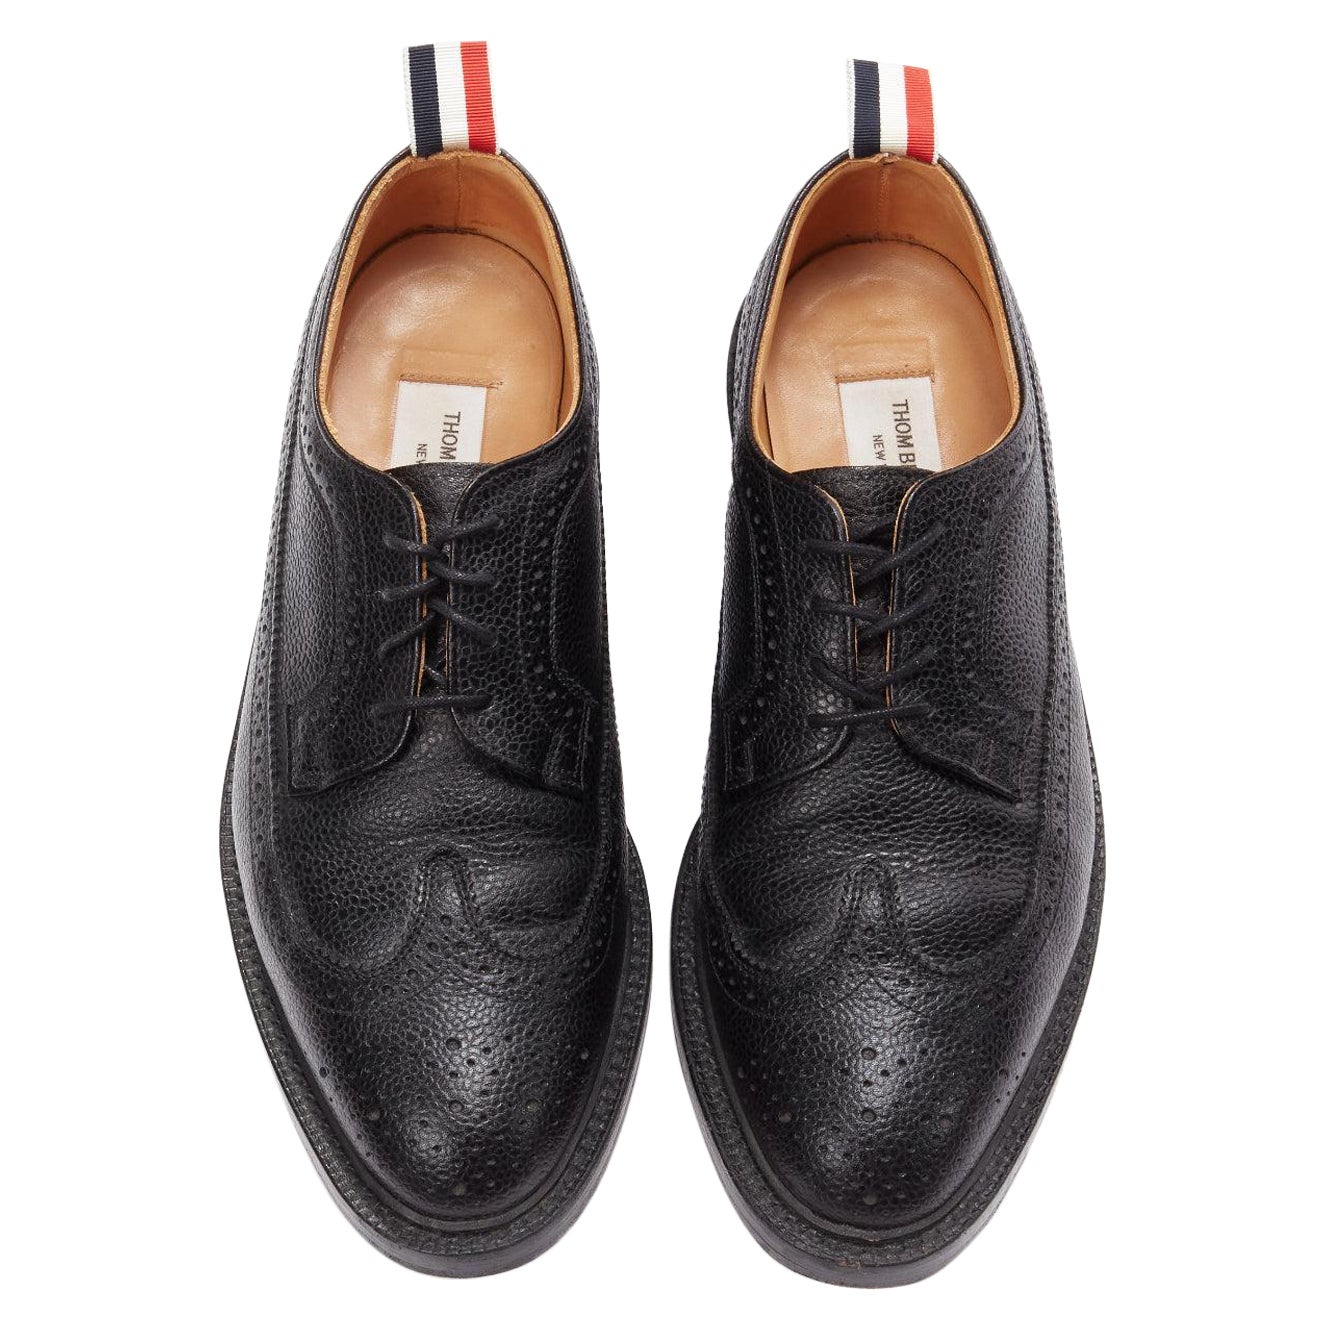 THOM BROWNE black grained leather perforated oxford brogue shoes EU42.5 For Sale